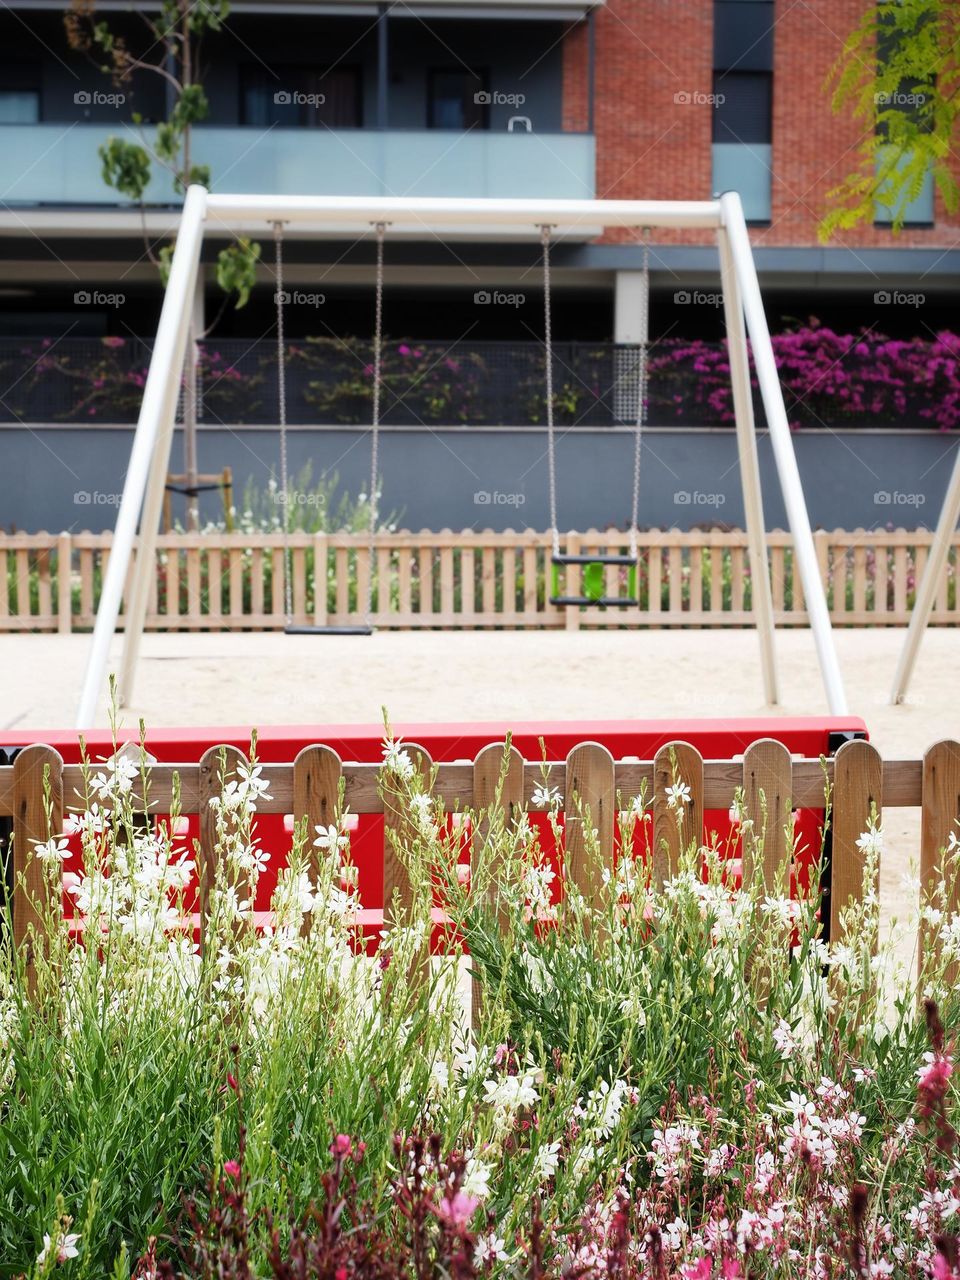 The flowers and the swings in a playground